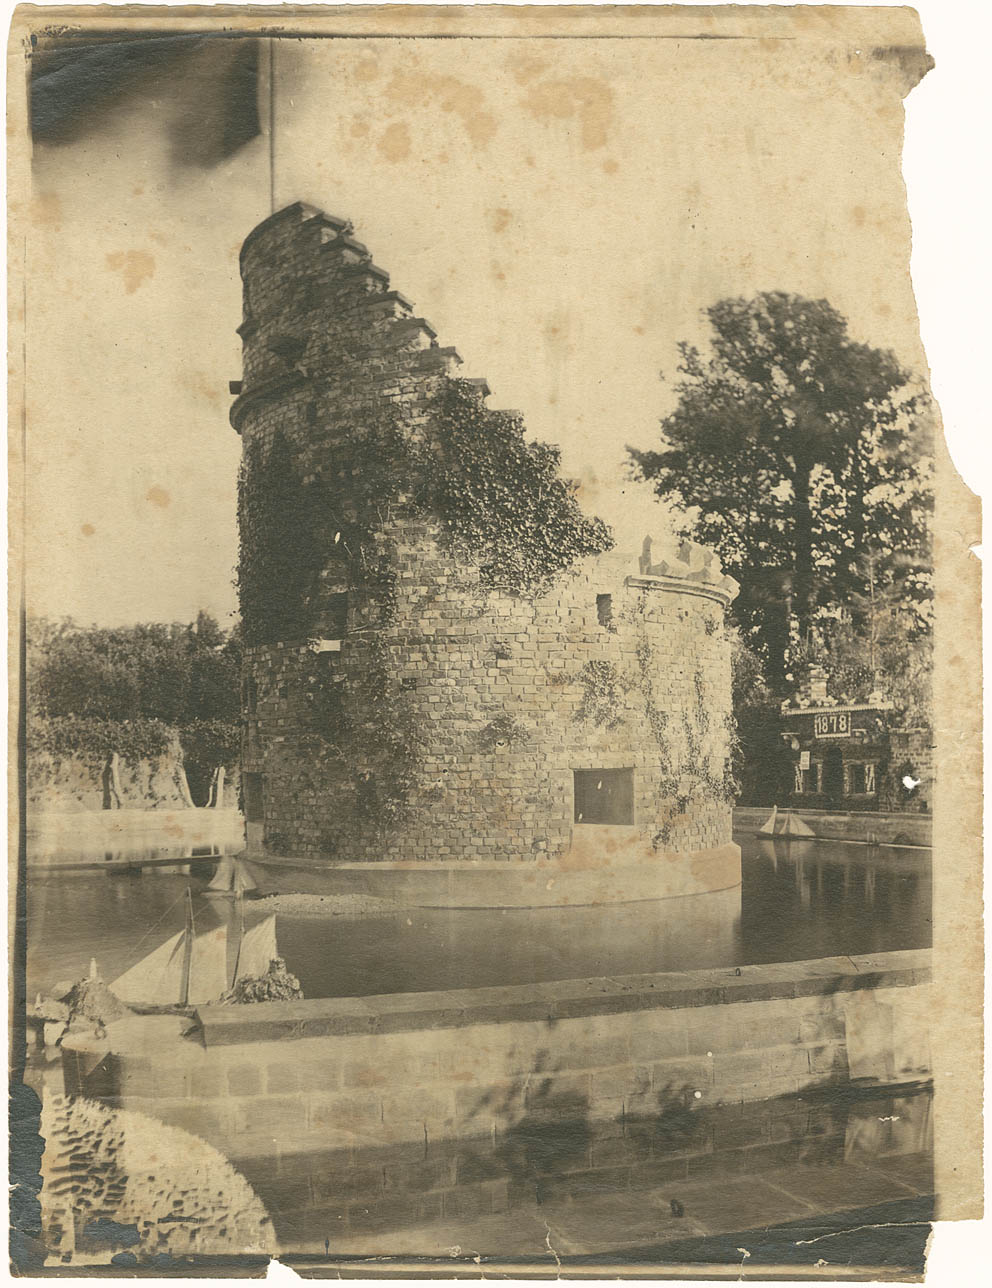 Photograph_of_the_tower_in_the_middle_of_the_lake_at_the_Troglodyte_Caves_Societe_Jersiaise_Photo_Archive.jpg